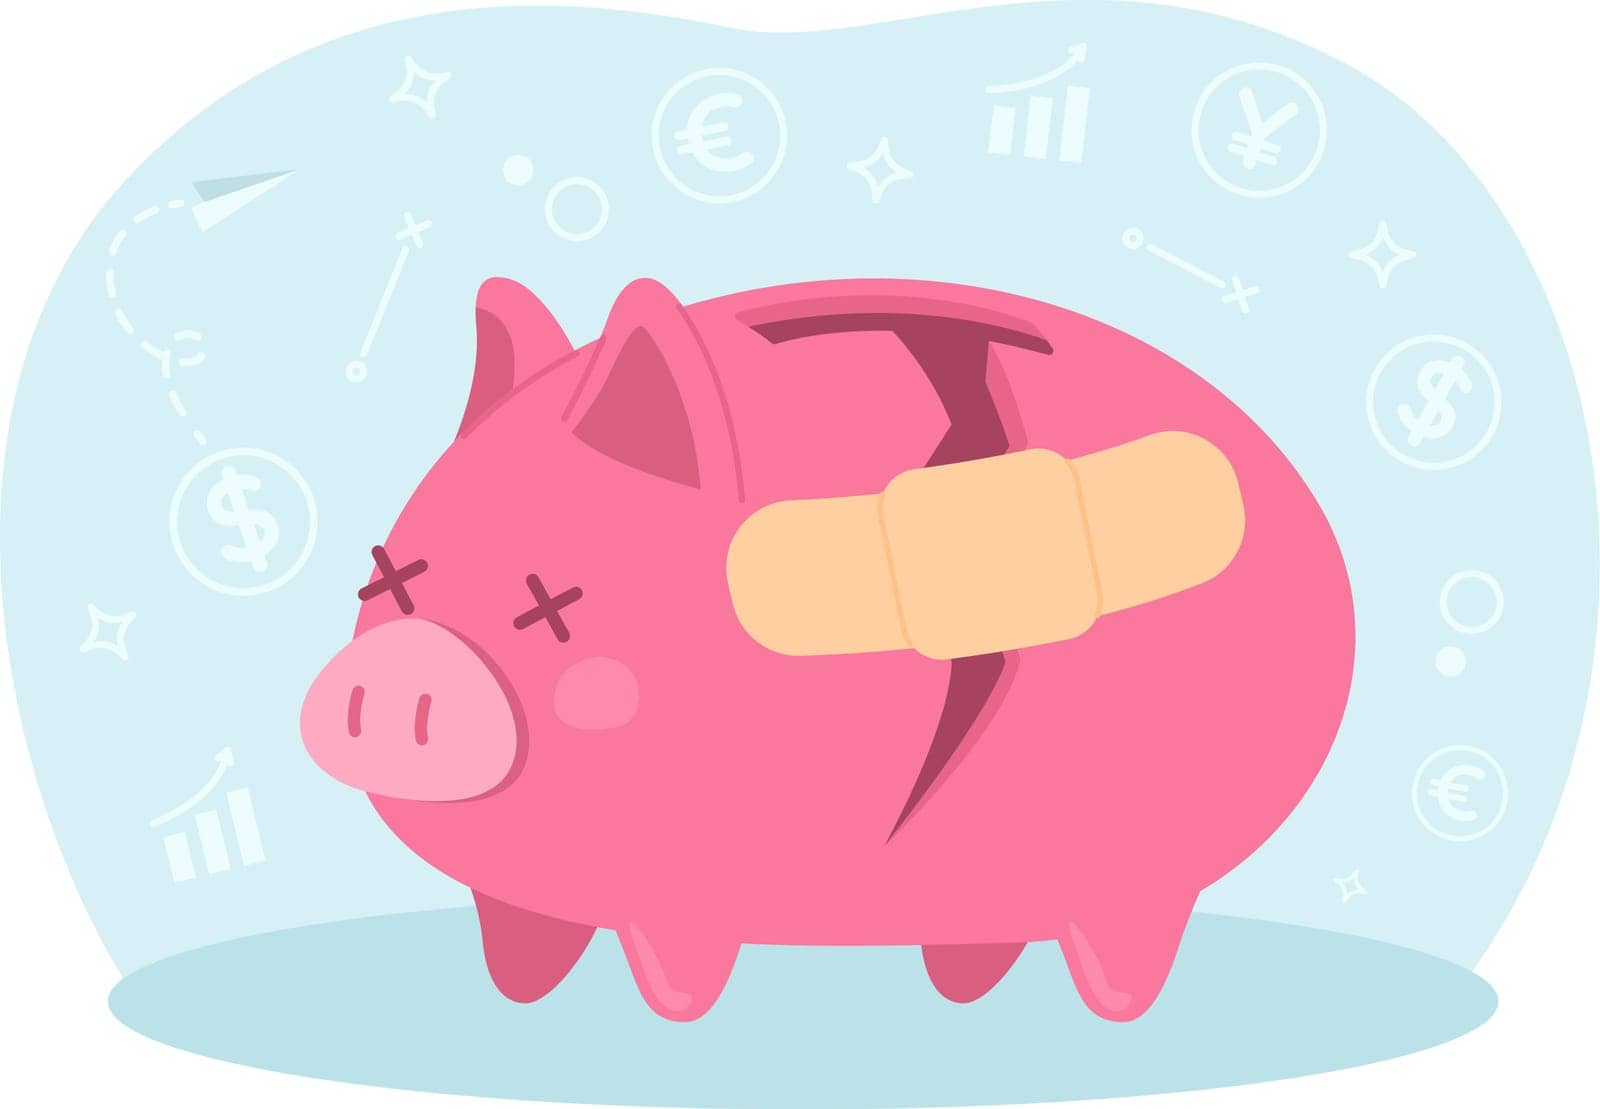 Fixing shattered piggy bank 2D vector isolated spot illustration by ntl